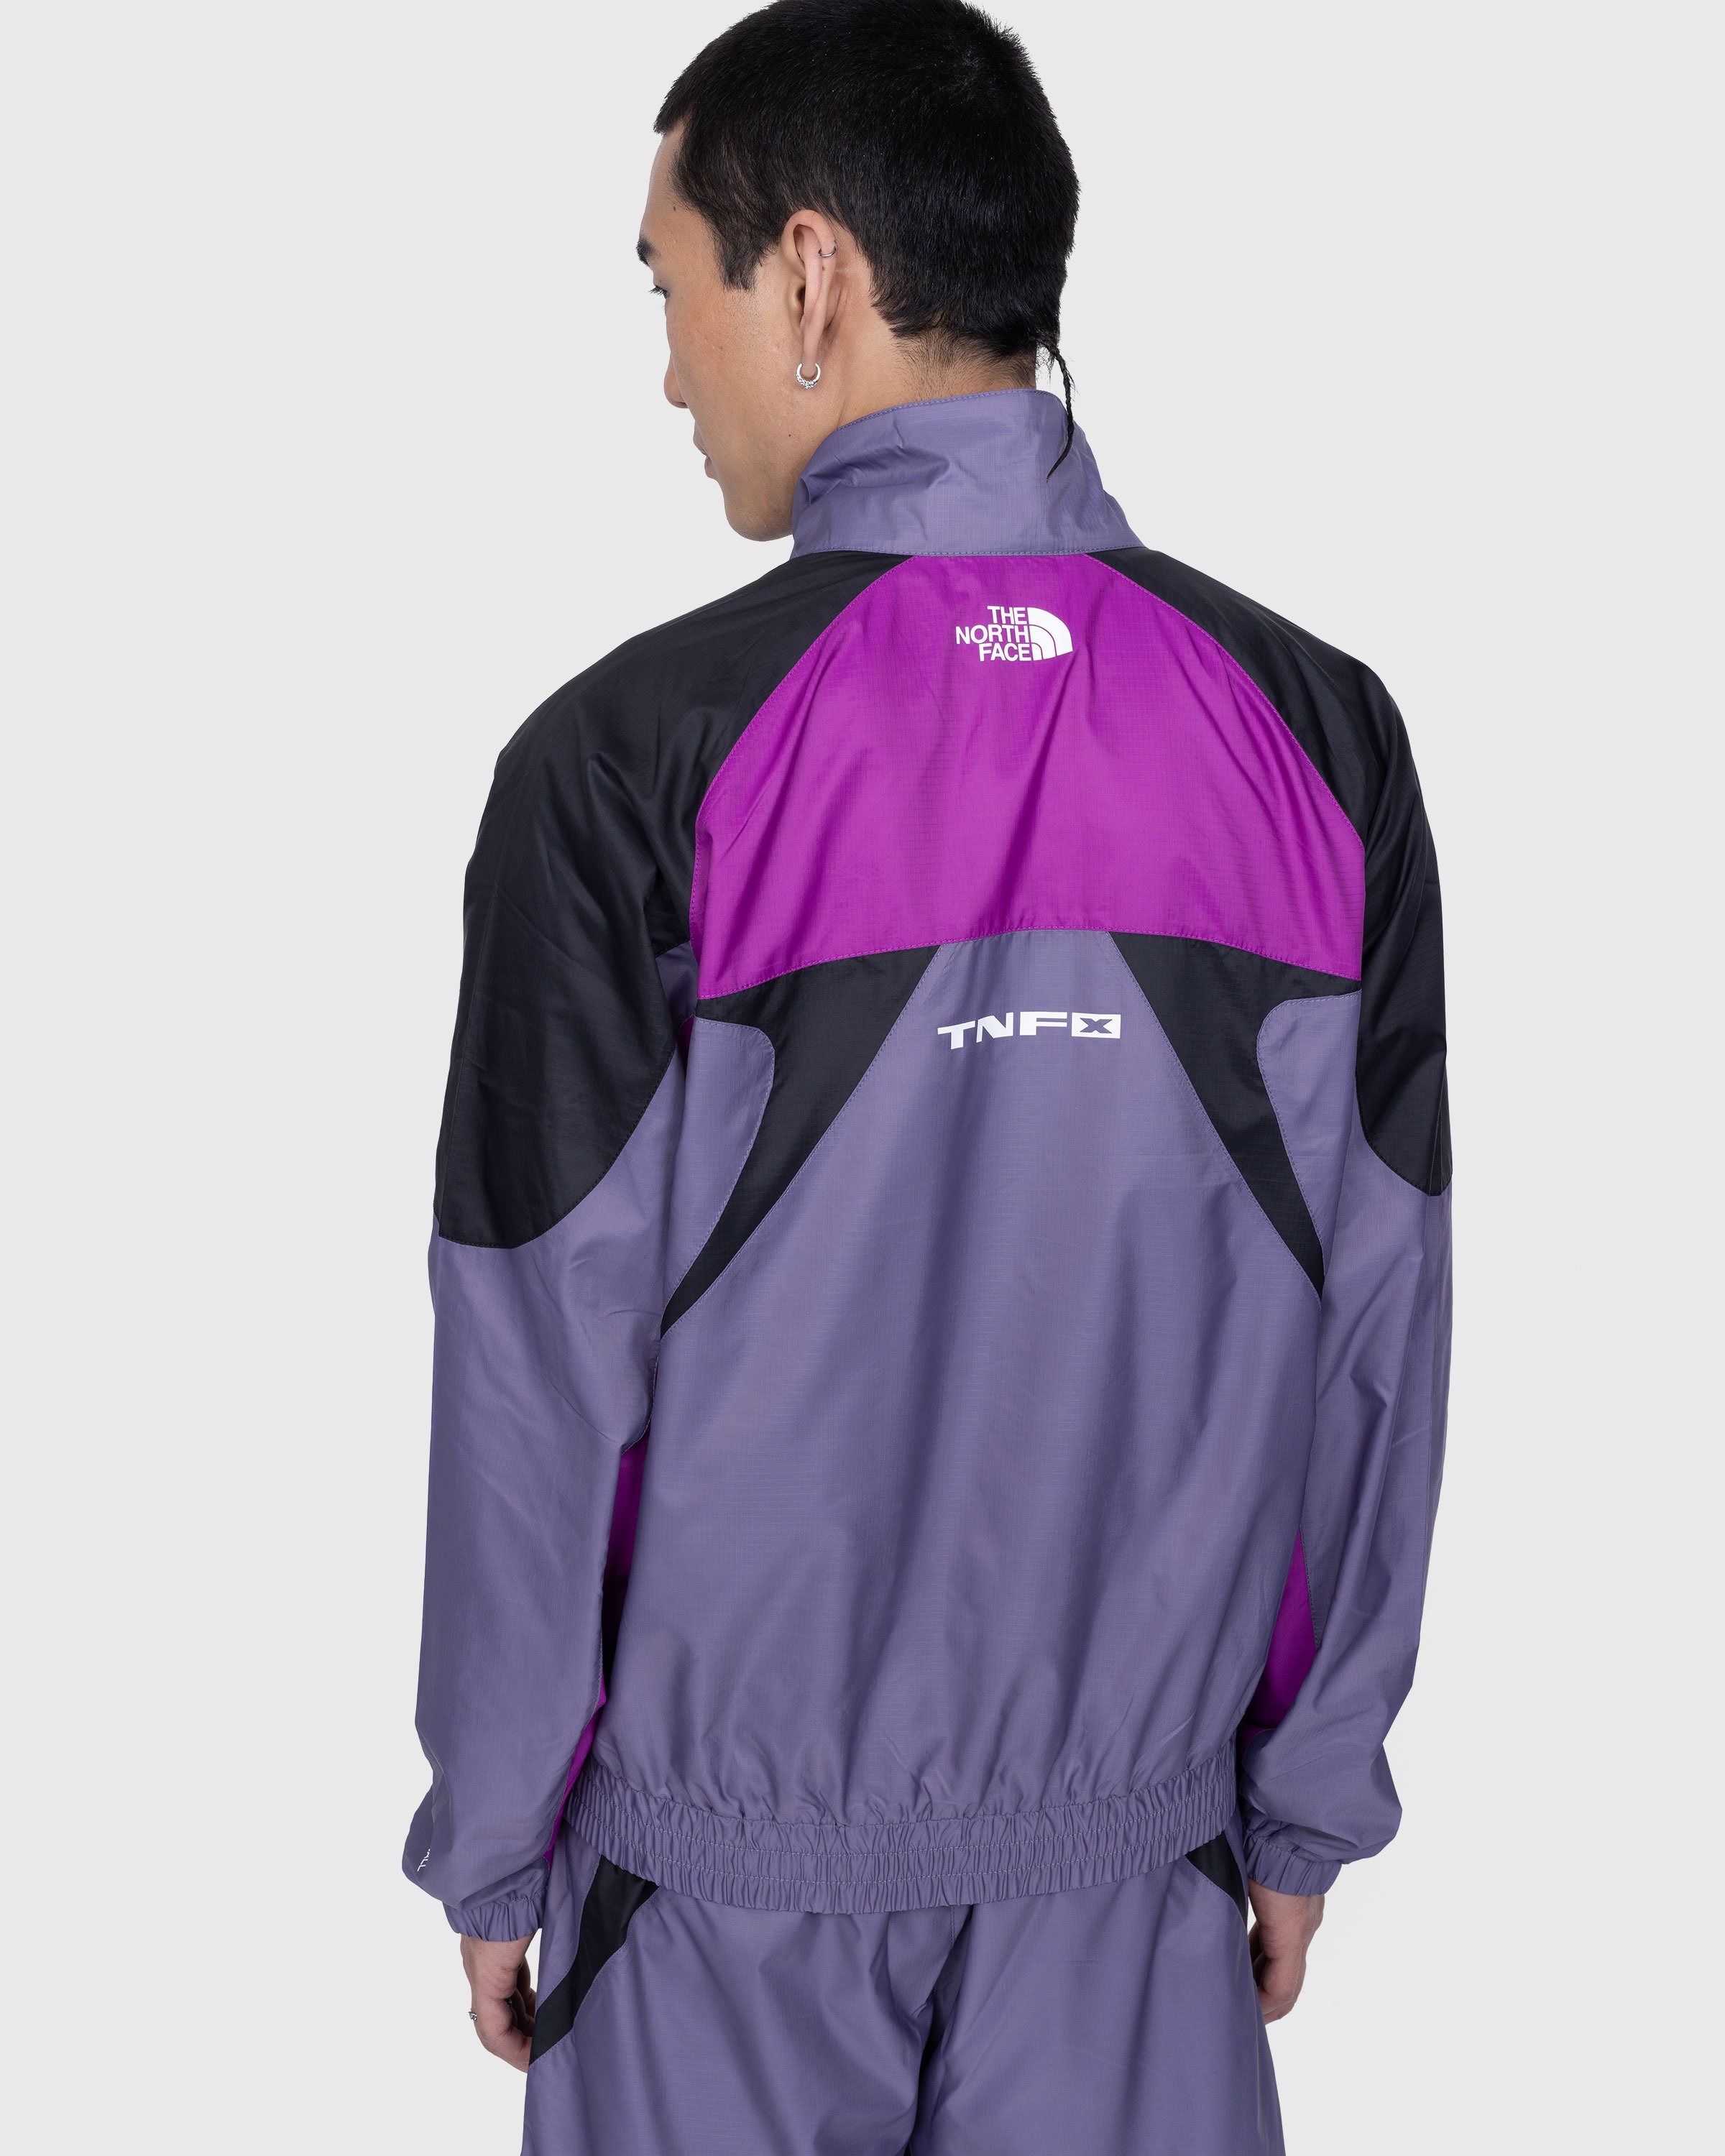 The North Face - TNF X Jacket Purple - Clothing - Blue - Image 3